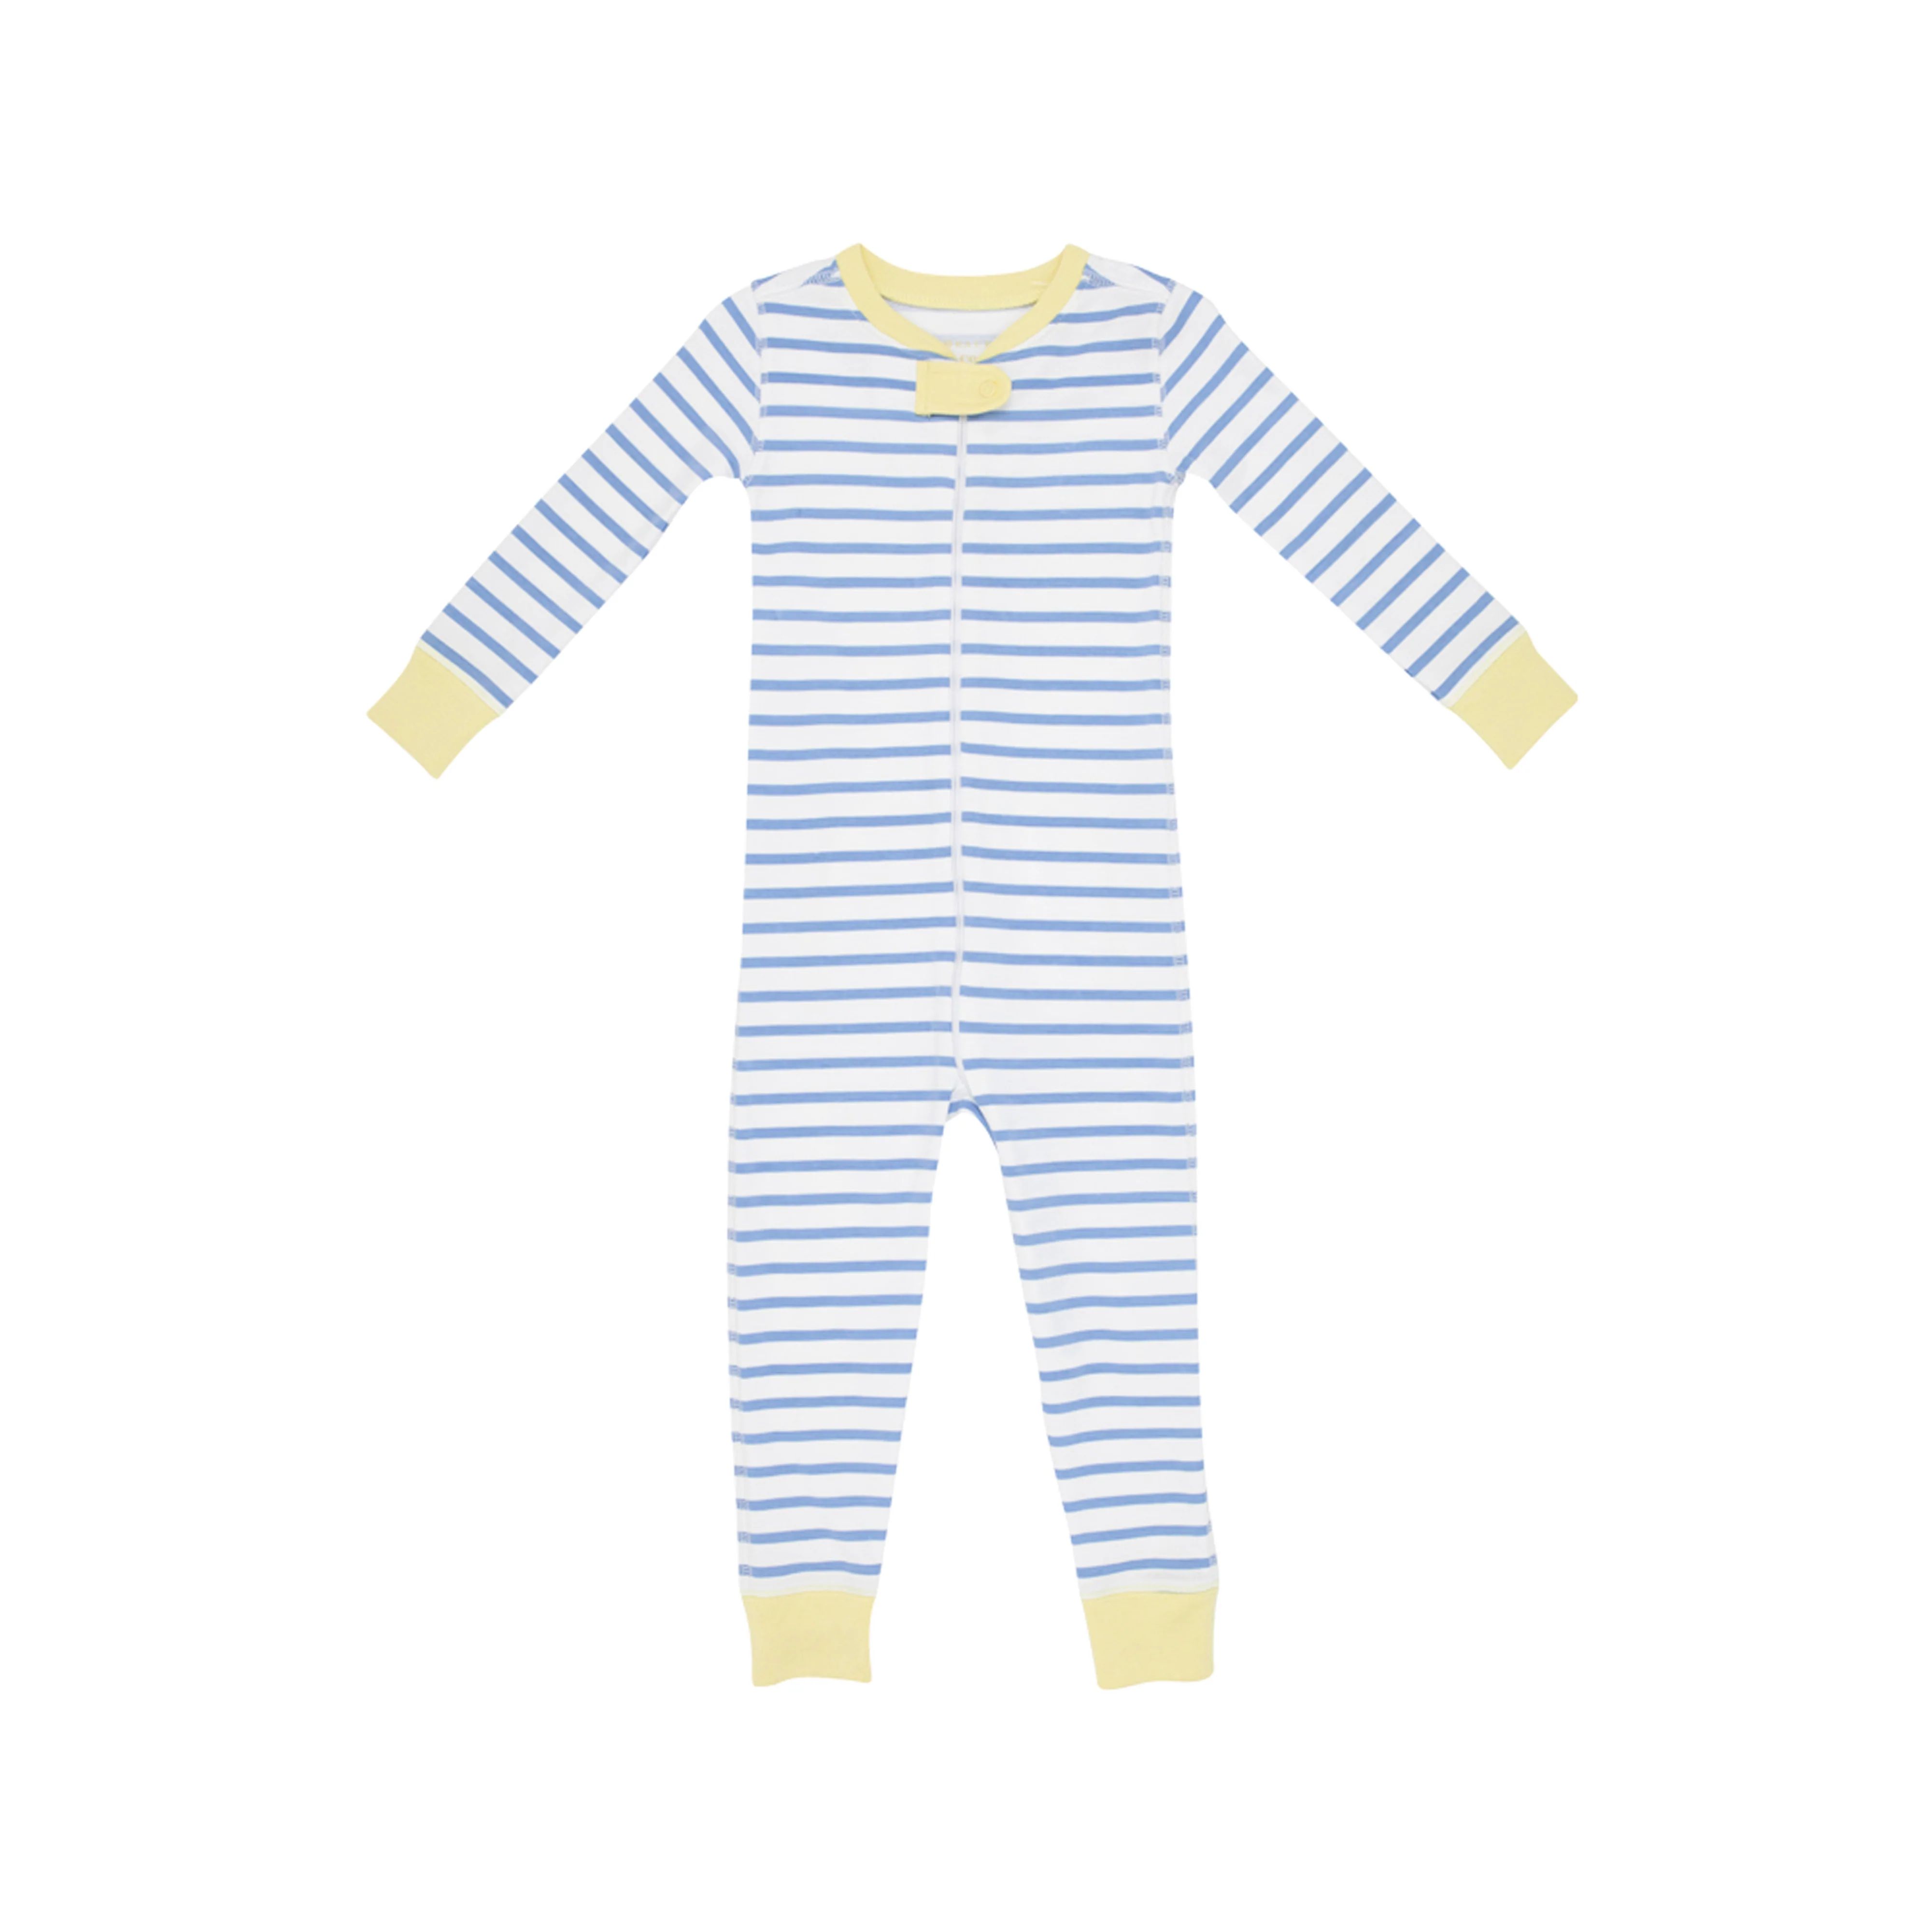 Knox's Night Night (Unisex) - Barbados Blue Stripe with Lake Worth Yellow | The Beaufort Bonnet Company